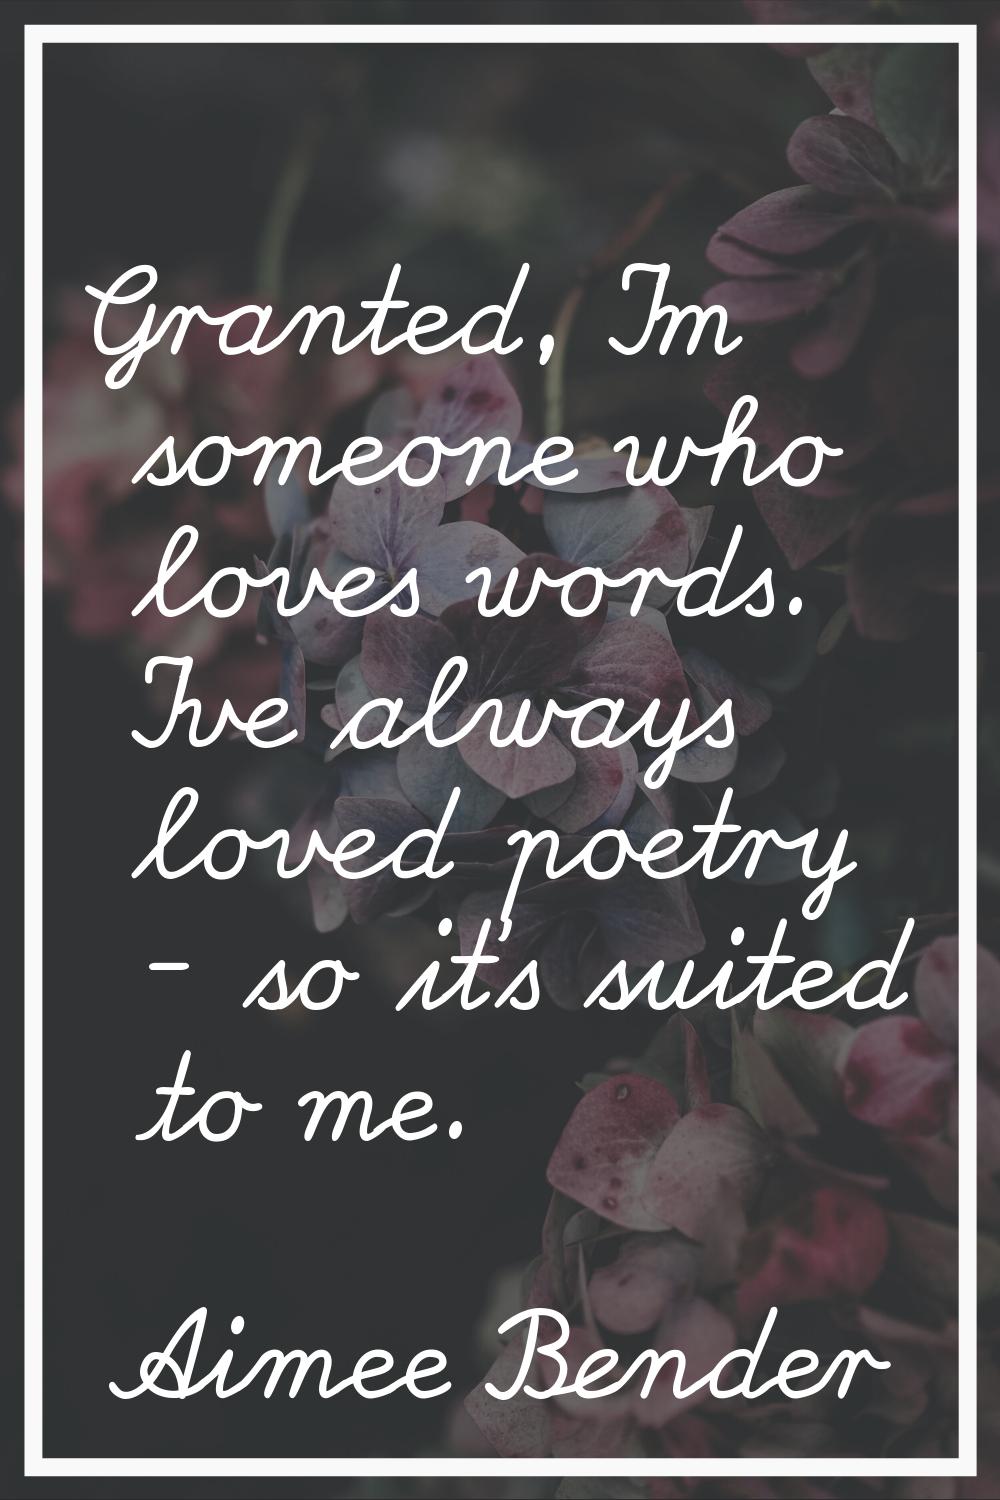 Granted, I'm someone who loves words. I've always loved poetry - so it's suited to me.